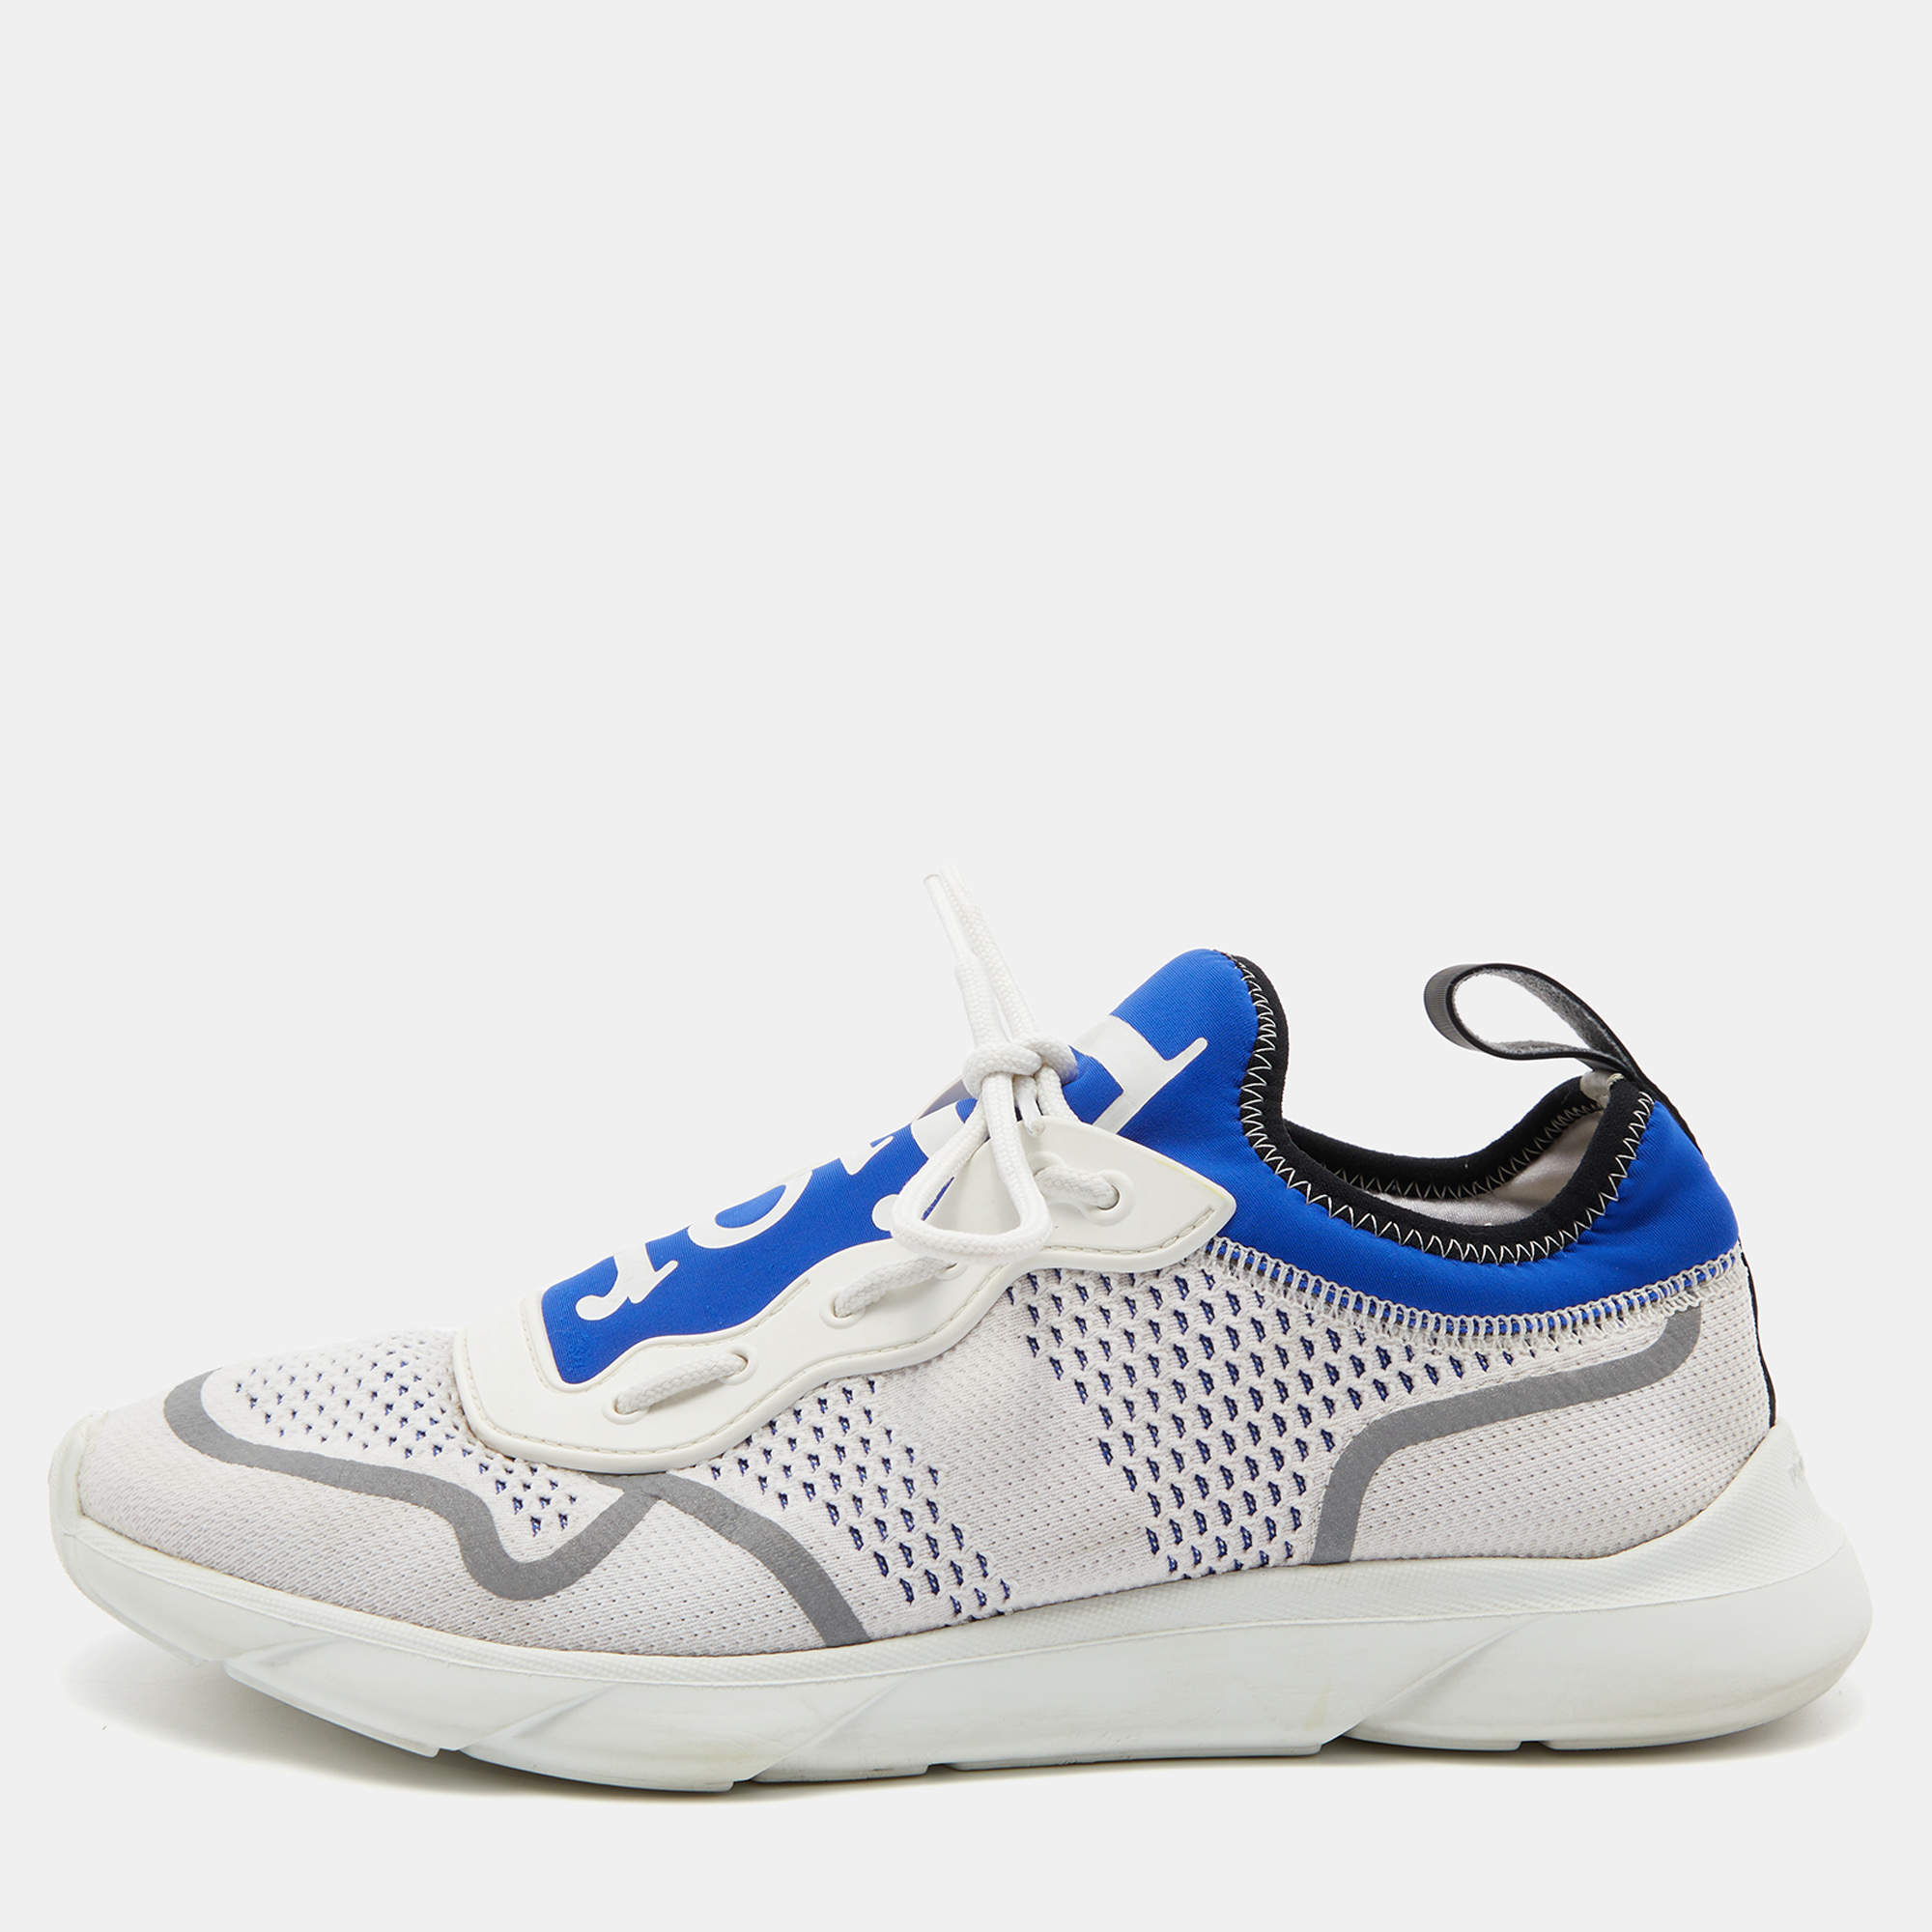 Total 64+ imagen dior homme tennis shoes - Abzlocal.mx